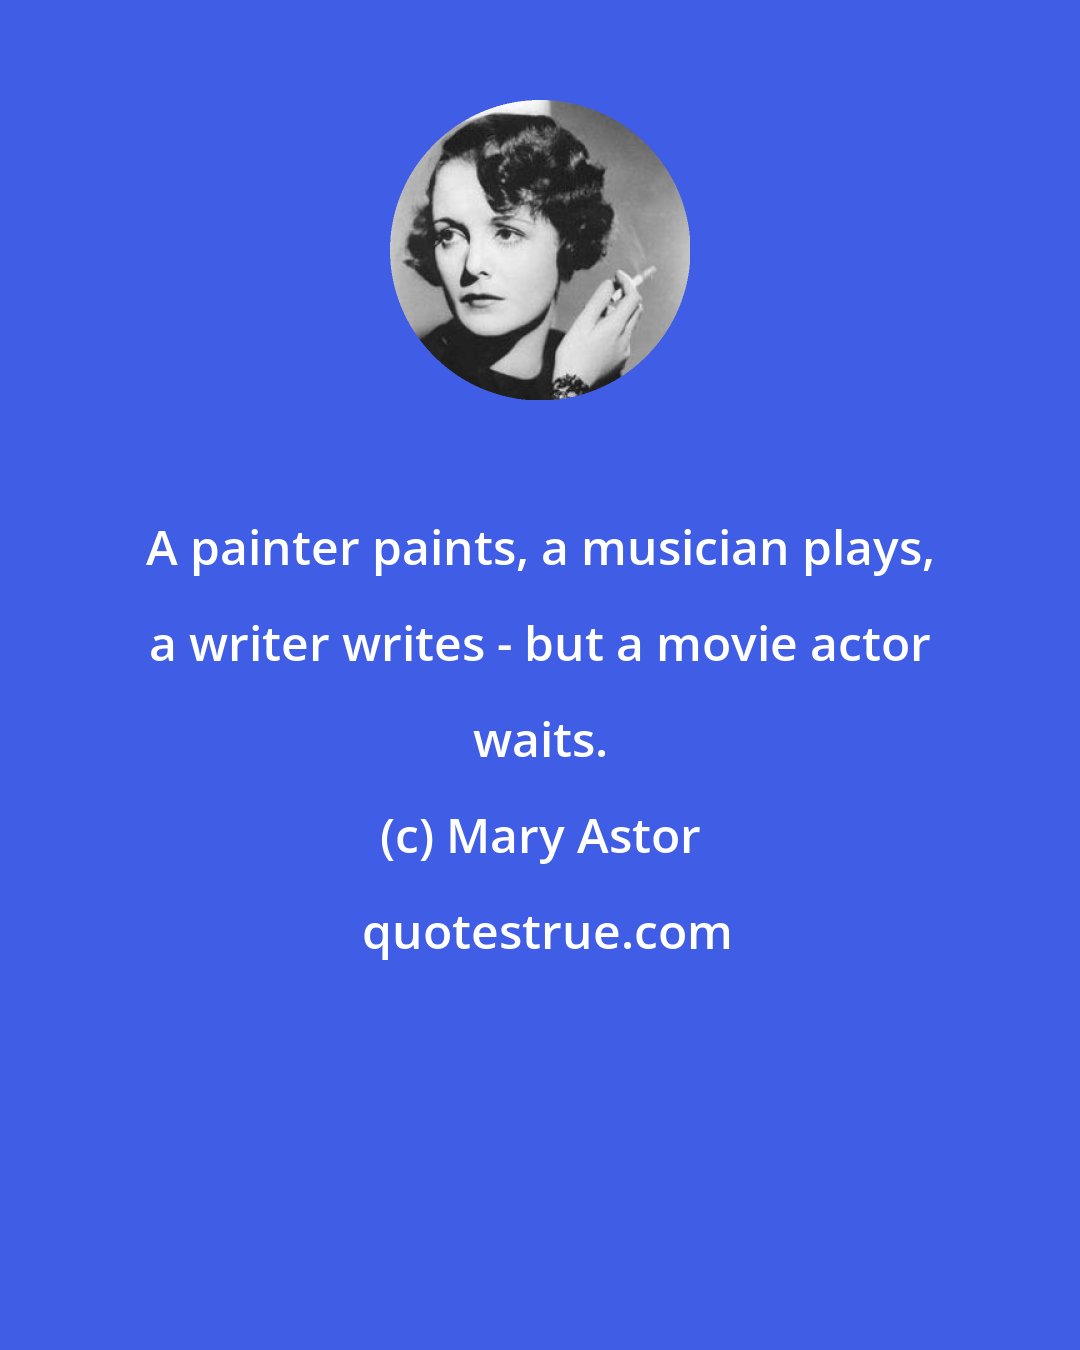 Mary Astor: A painter paints, a musician plays, a writer writes - but a movie actor waits.